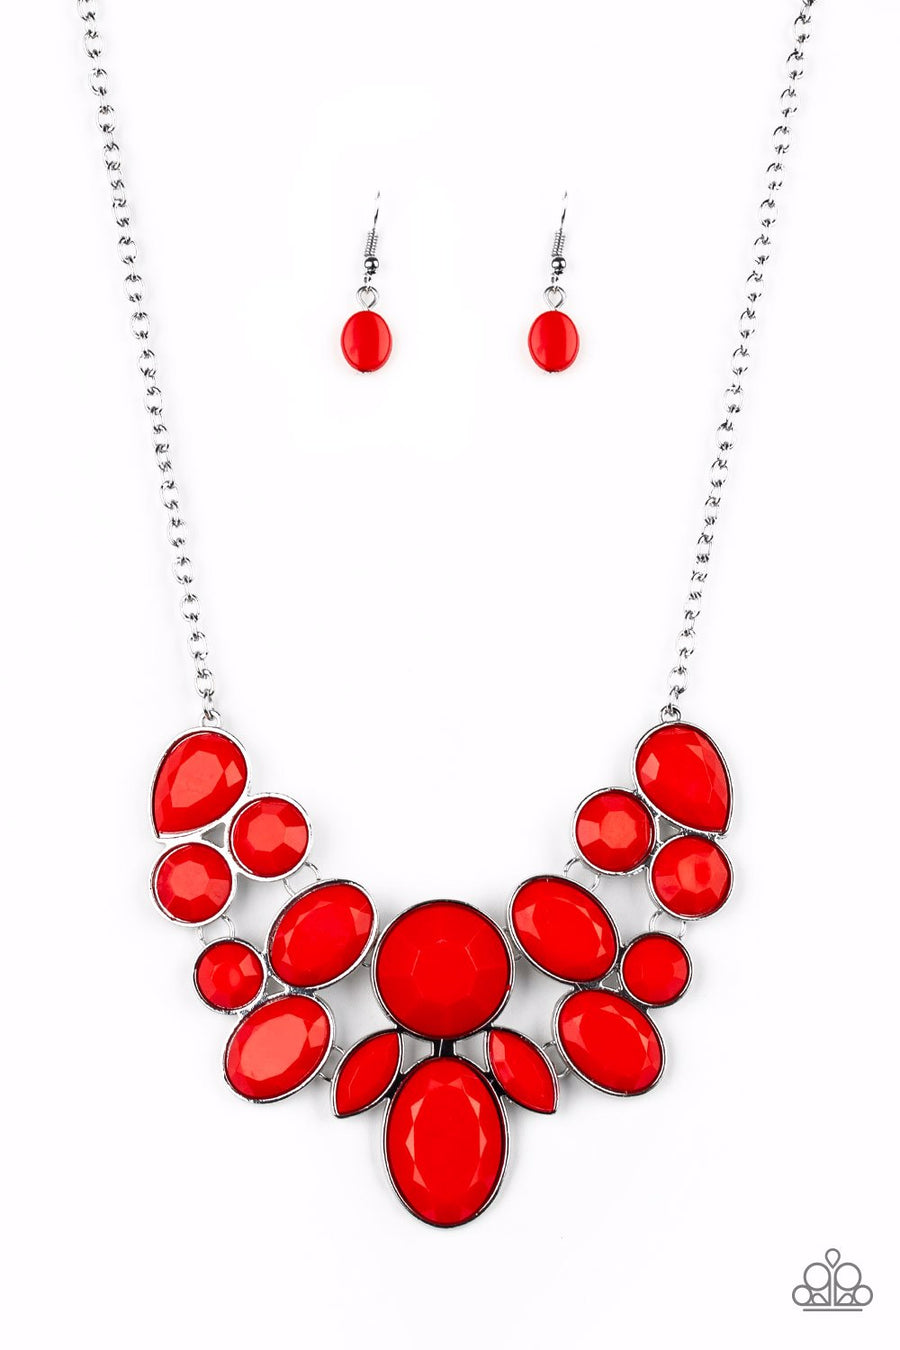 Demi-Diva Red and Silver Necklace - Paparazzi Accessories Bejeweled Accessories By Kristie